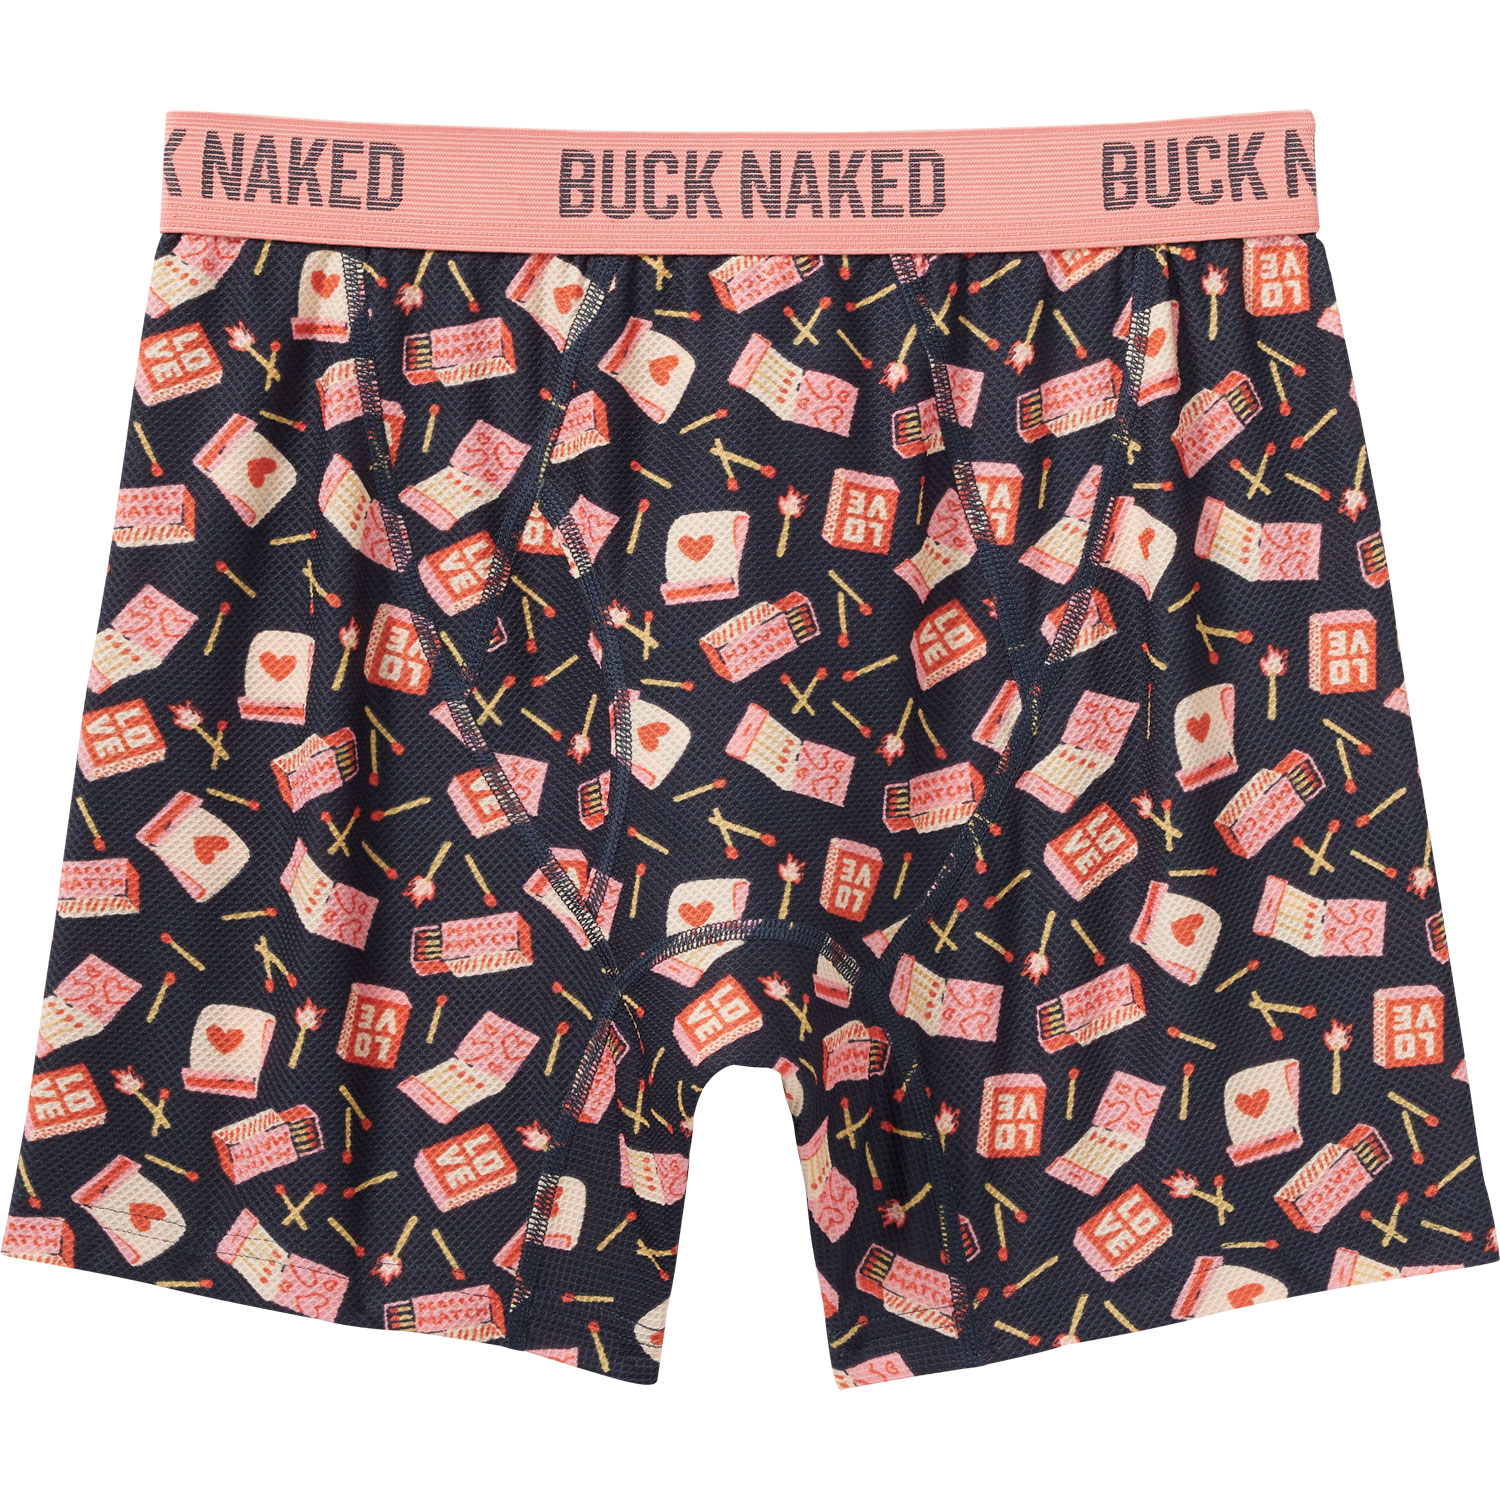 Duluth Trading Company - Who doesn't want to get Buck Naked this Christmas?  Today only: get our Men's Buck Naked Underwear for just $12, and Women's  Buck Naked and Free Range Underwear